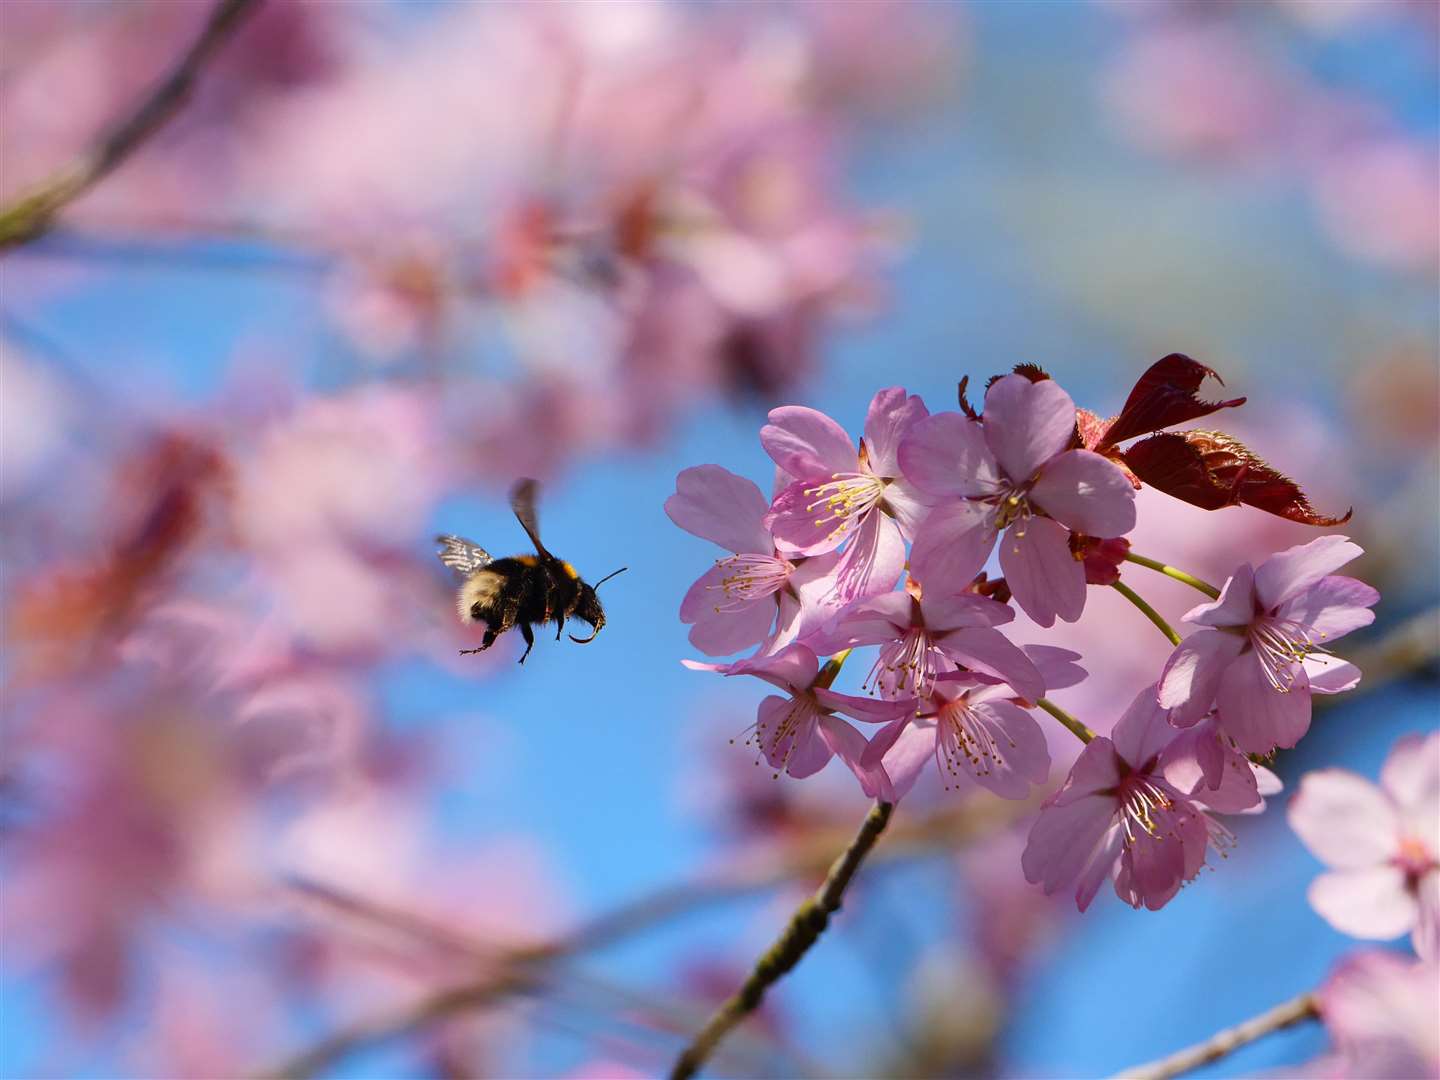 A bumblebee feeding on nectar on pink cherry blossom at Sheringham Park in Norfolk (Rob Coleman/National Trust/PA)